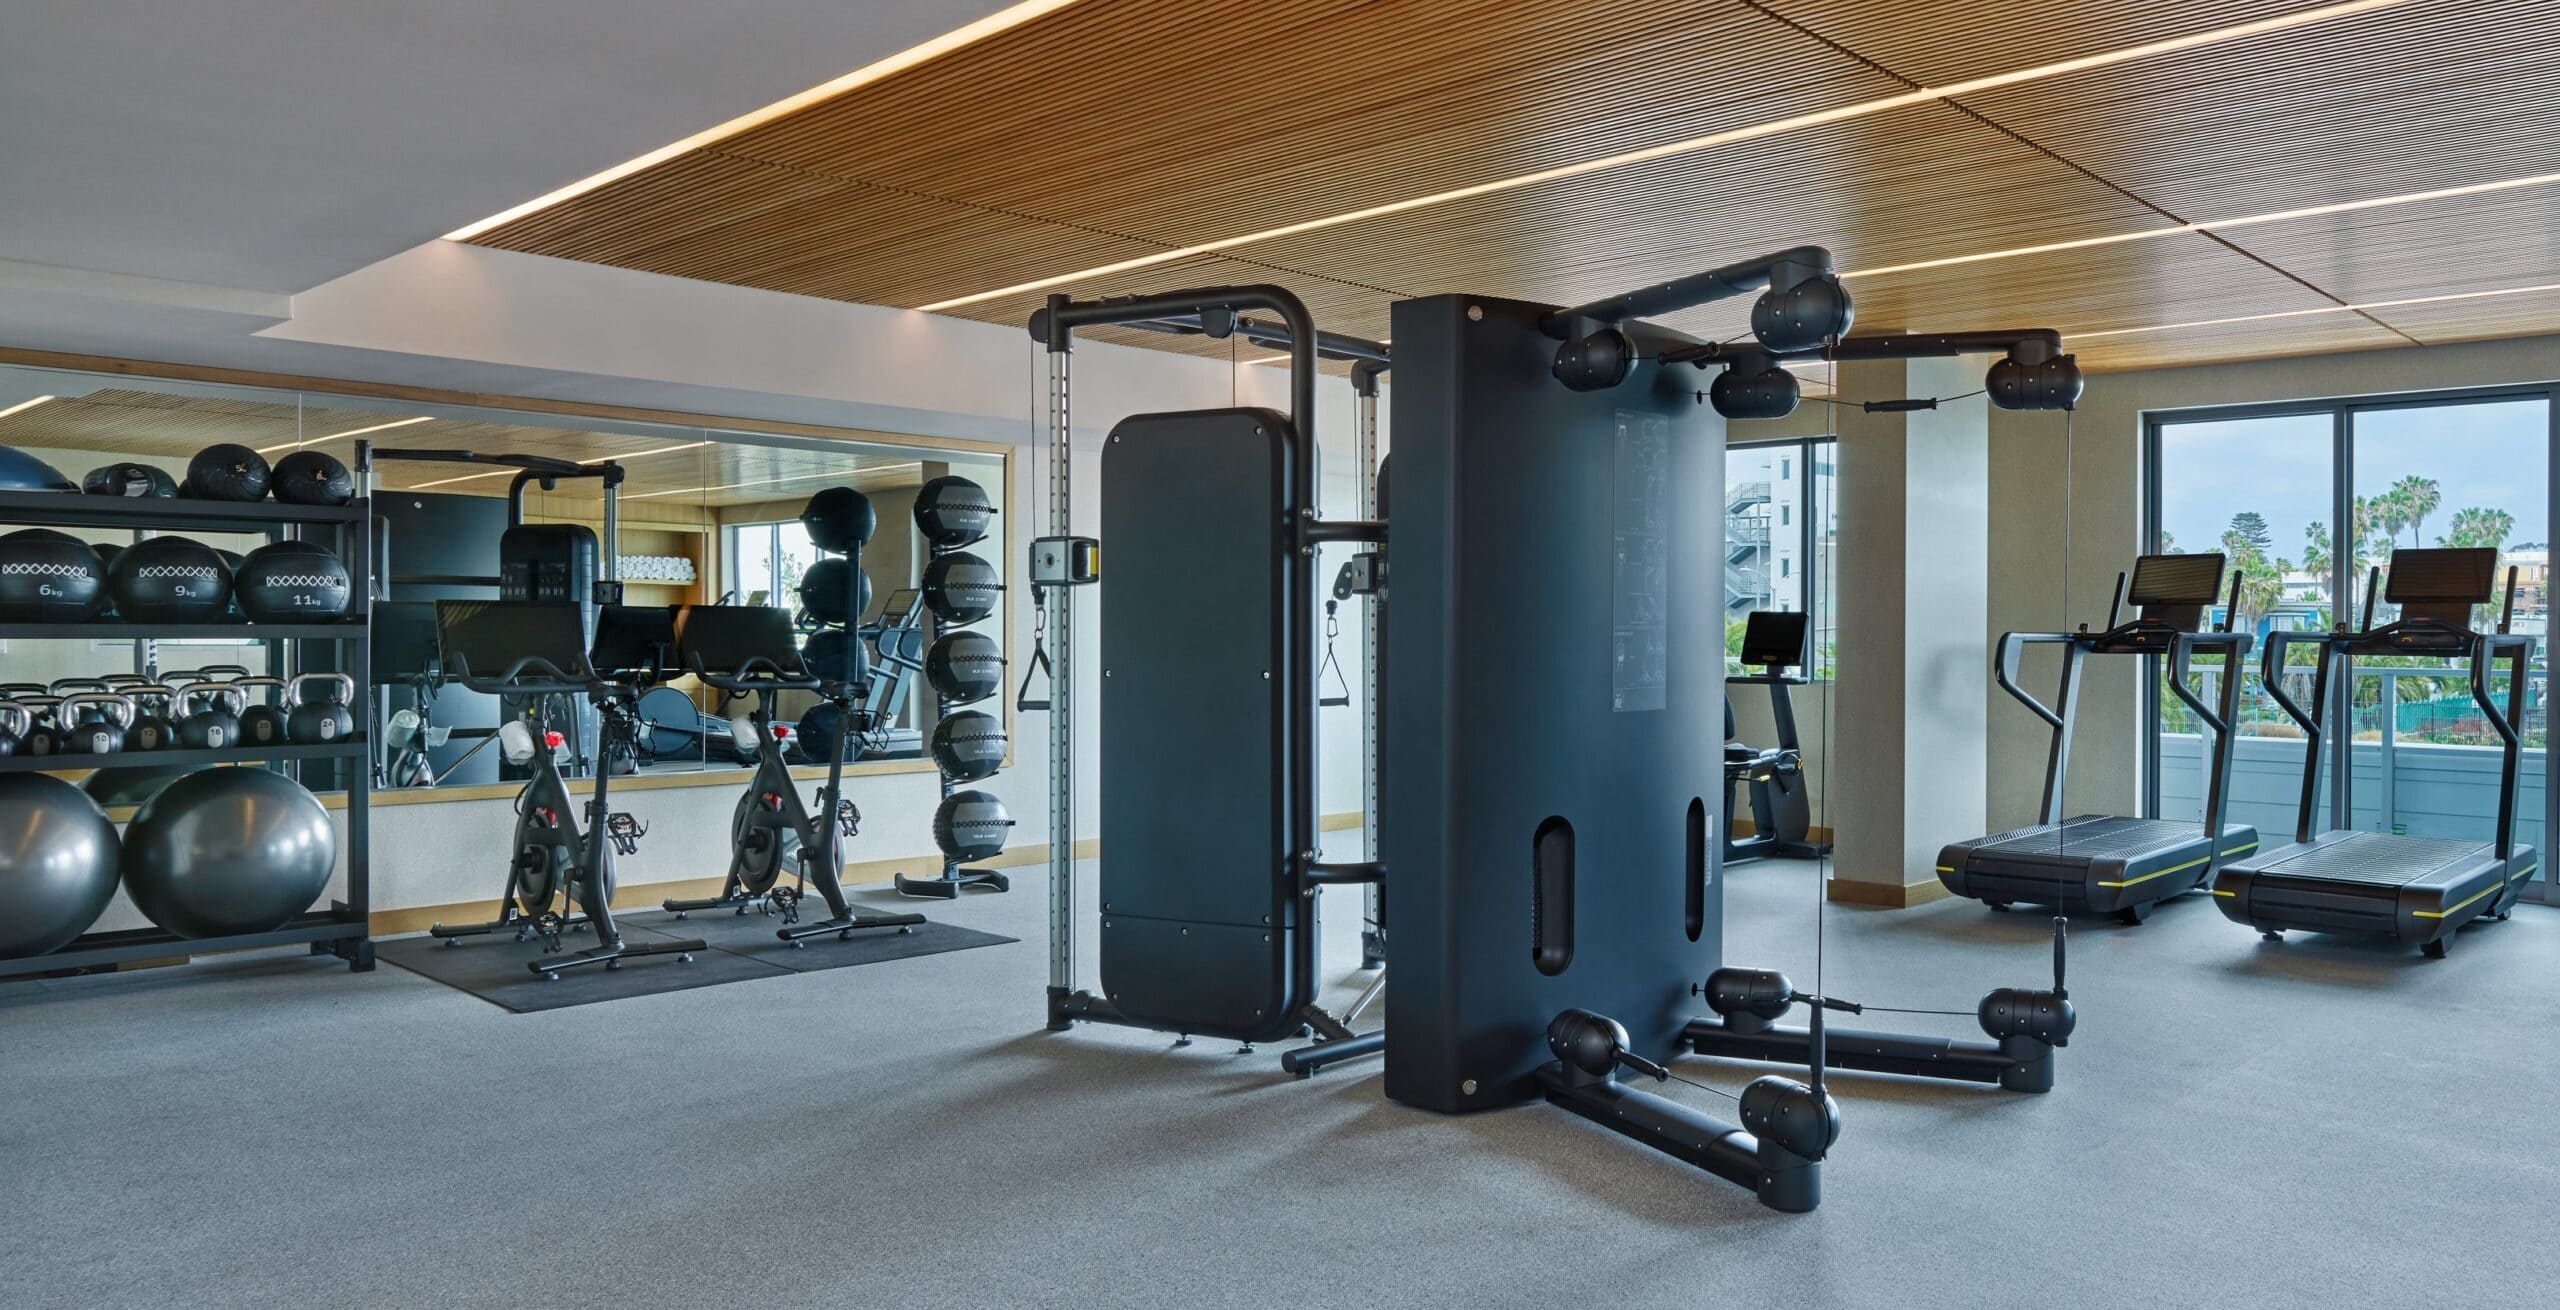 The Fitness Center of the Hotel - Sculpt FIT